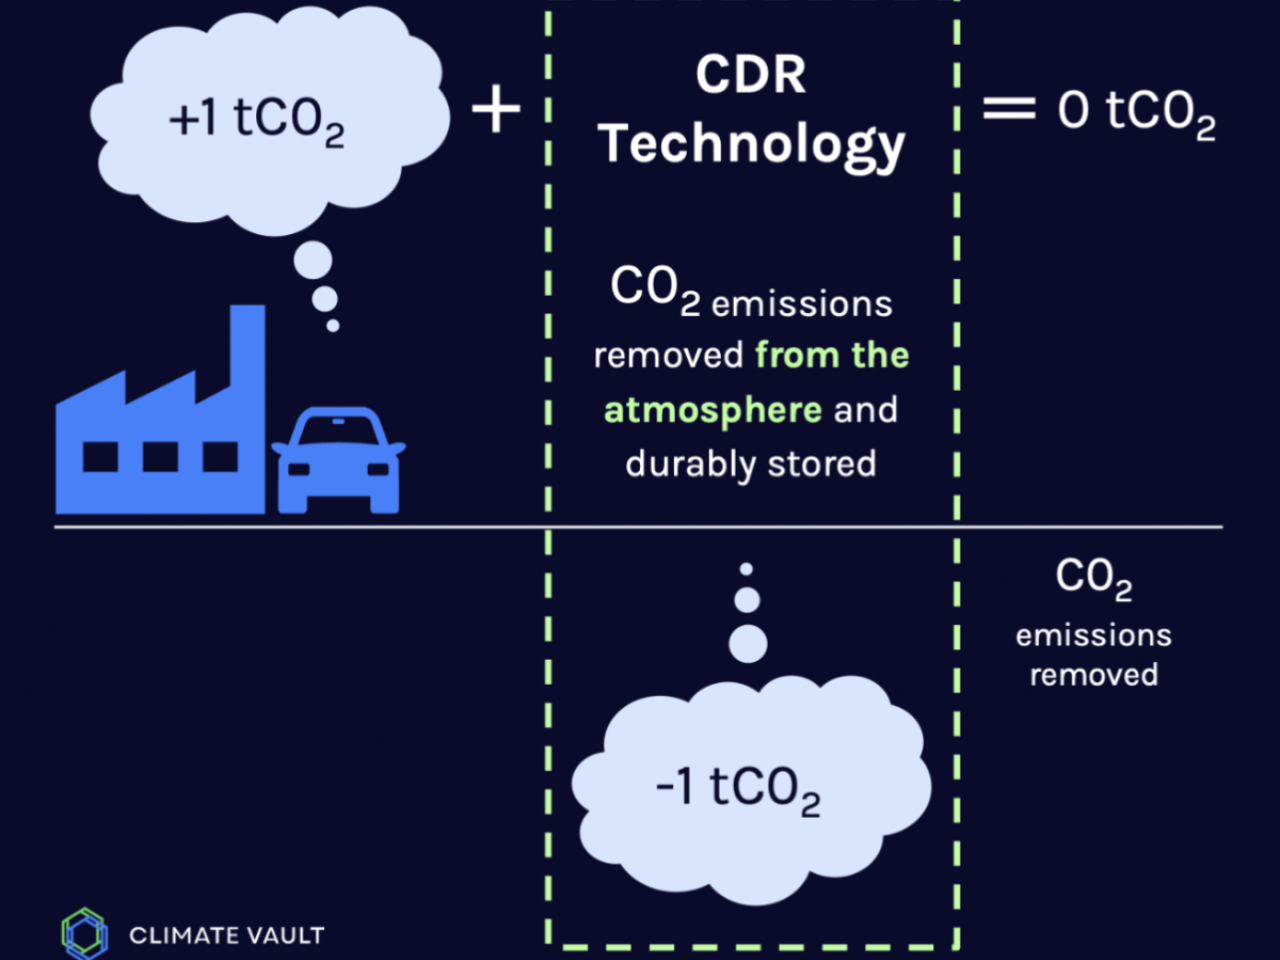 chart showing how CDR technology draws down the total amount (or PPM) of CO2 in the atmosphere